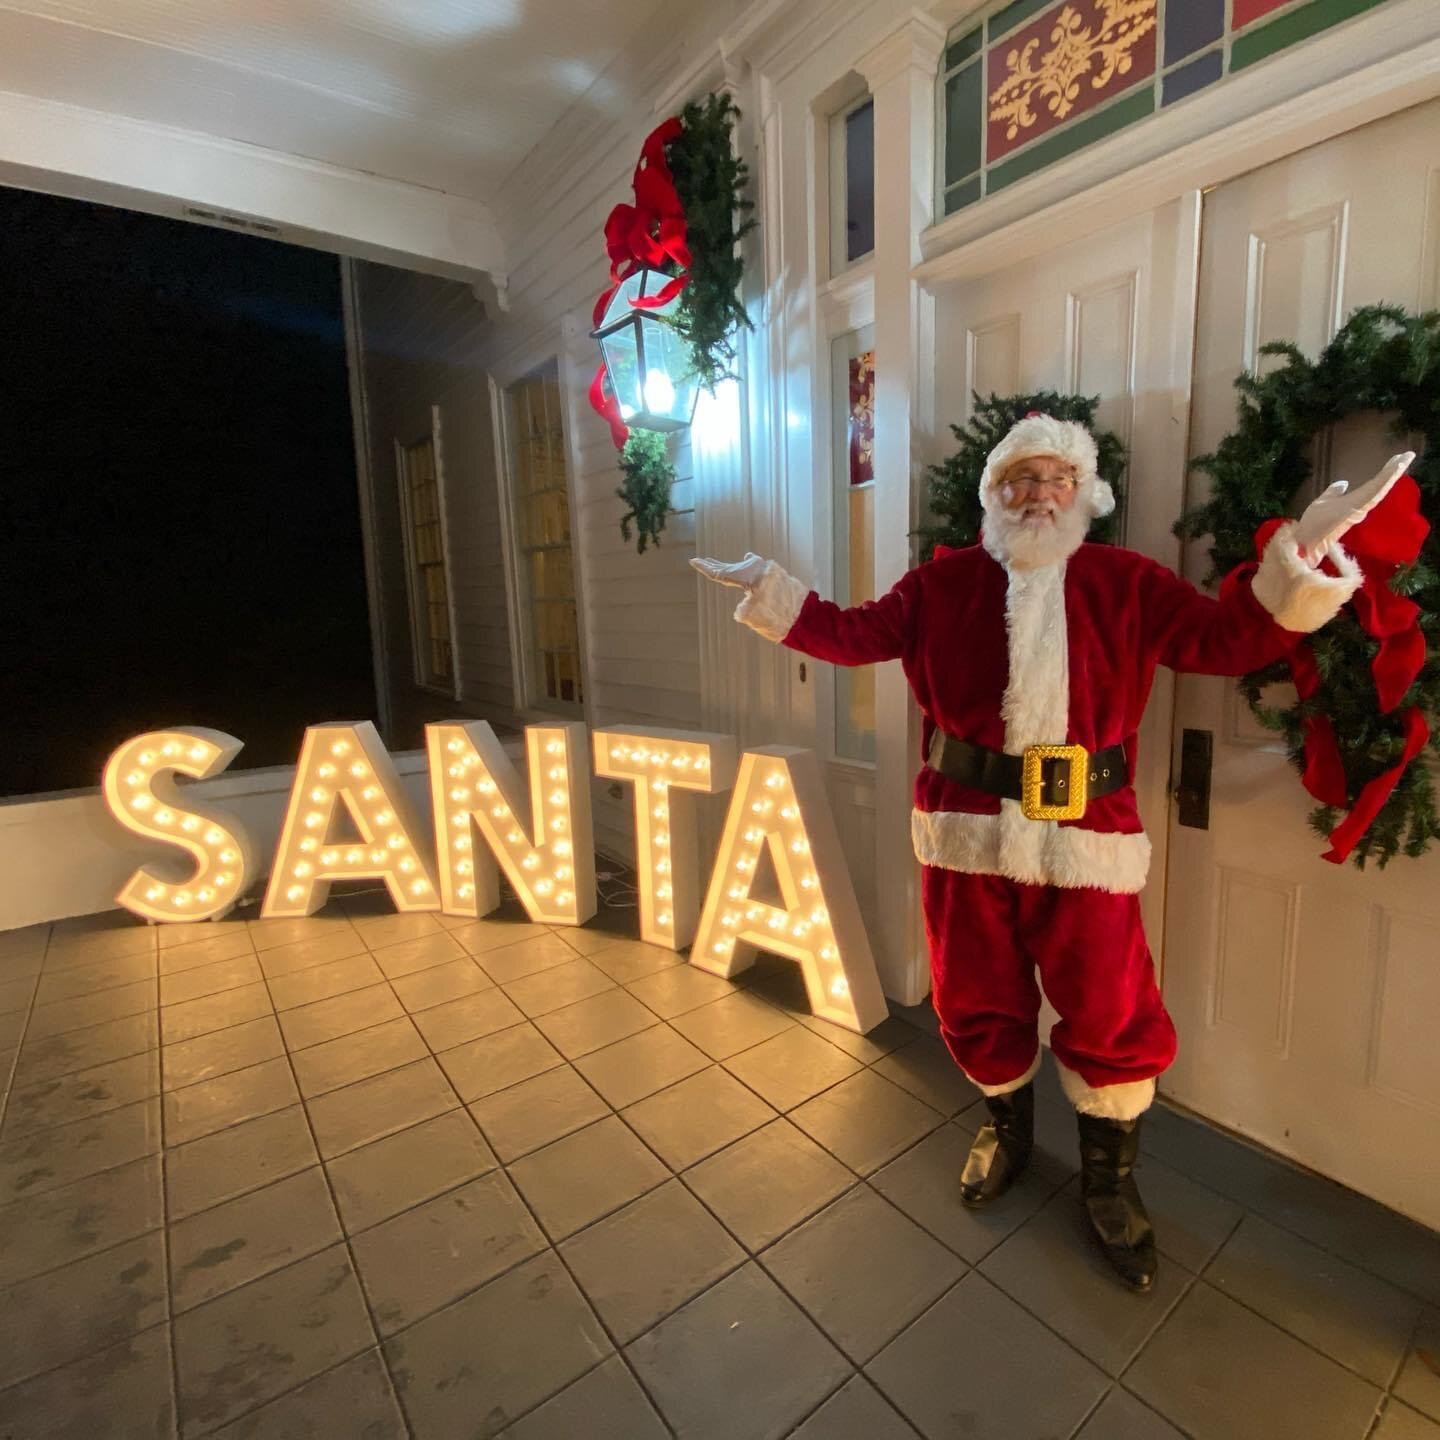 Santa is ready, and so are we! We can&rsquo;t wait to spend a magical evening with you! It&rsquo;s not too late to grab tickets and there are only a few left! See you soon 🎅🍪🎄

https://www.eventbrite.com/e/an-evening-with-santa-tickets-74954147773